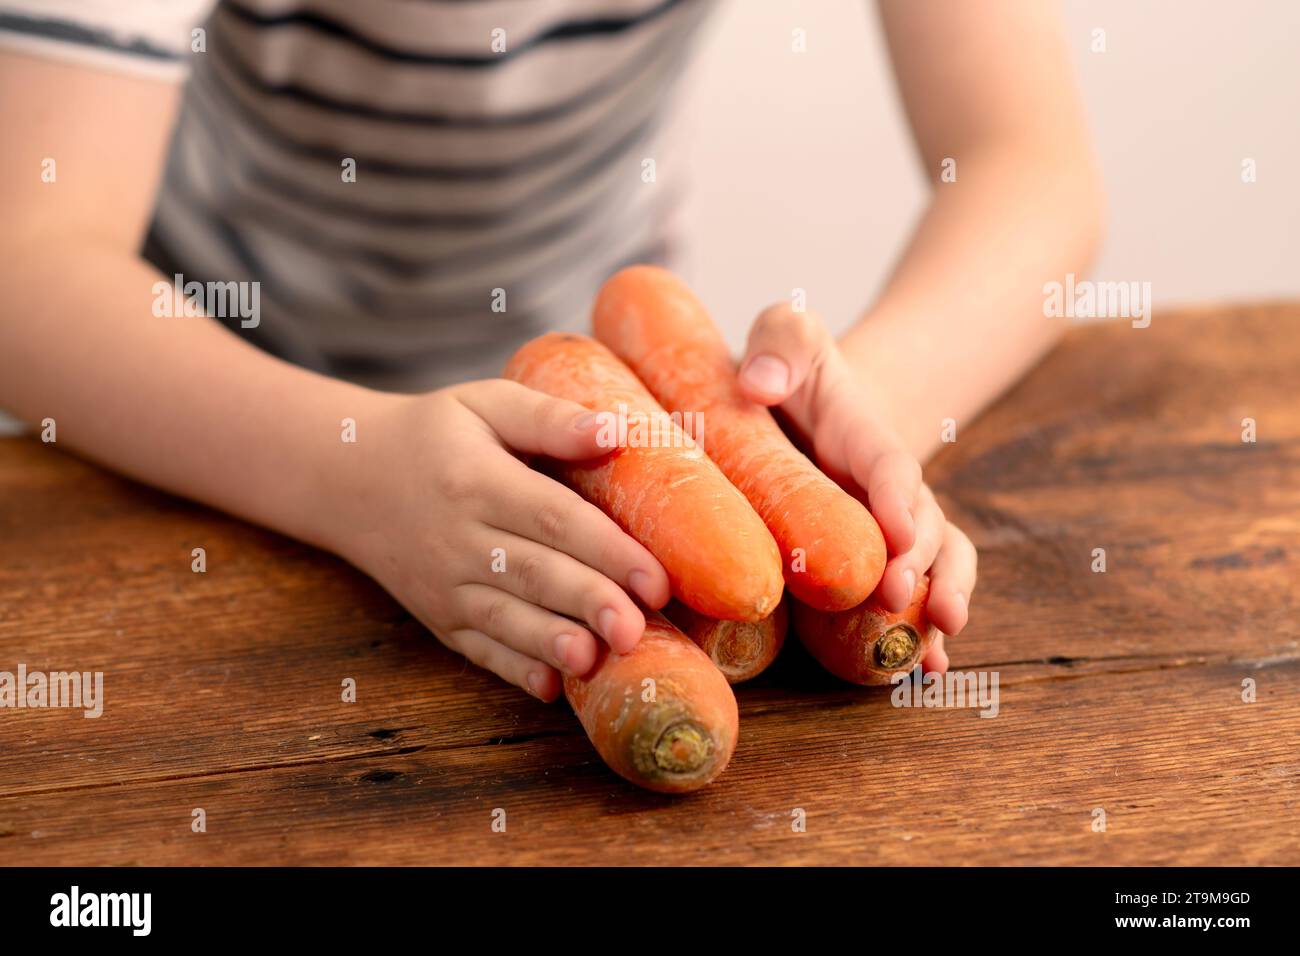 Child's hands hold a bunch of fresh carrots, a vivid display of wholesome harvest on a rustic wooden backdrop Stock Photo